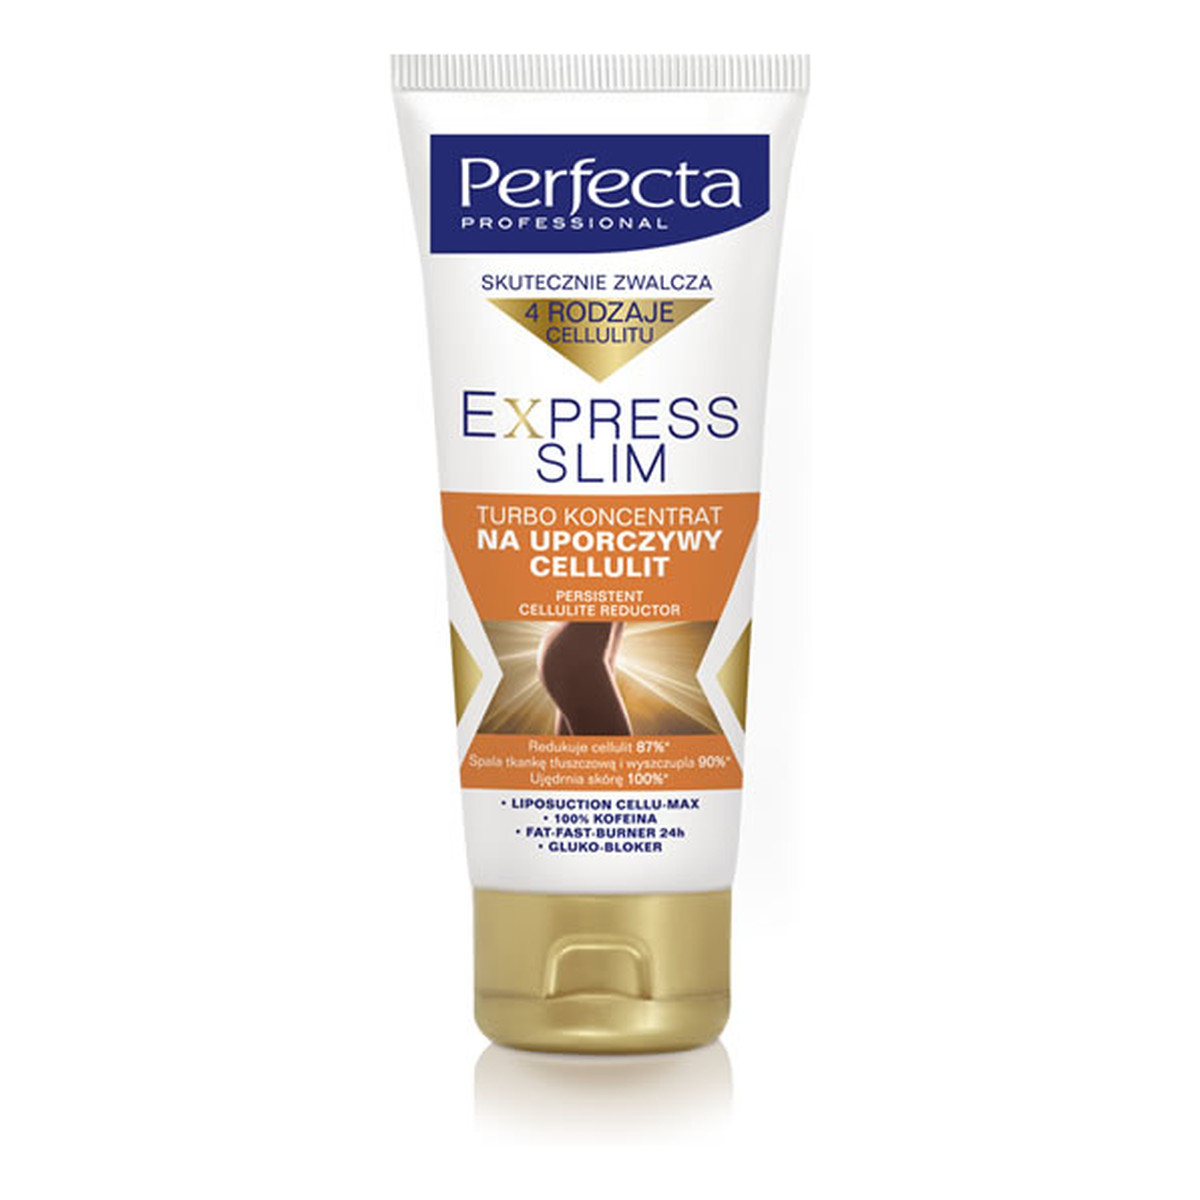 Perfecta Professional Express Slim Turbo Koncentrat Na Uporczywy Cellulit 200ml